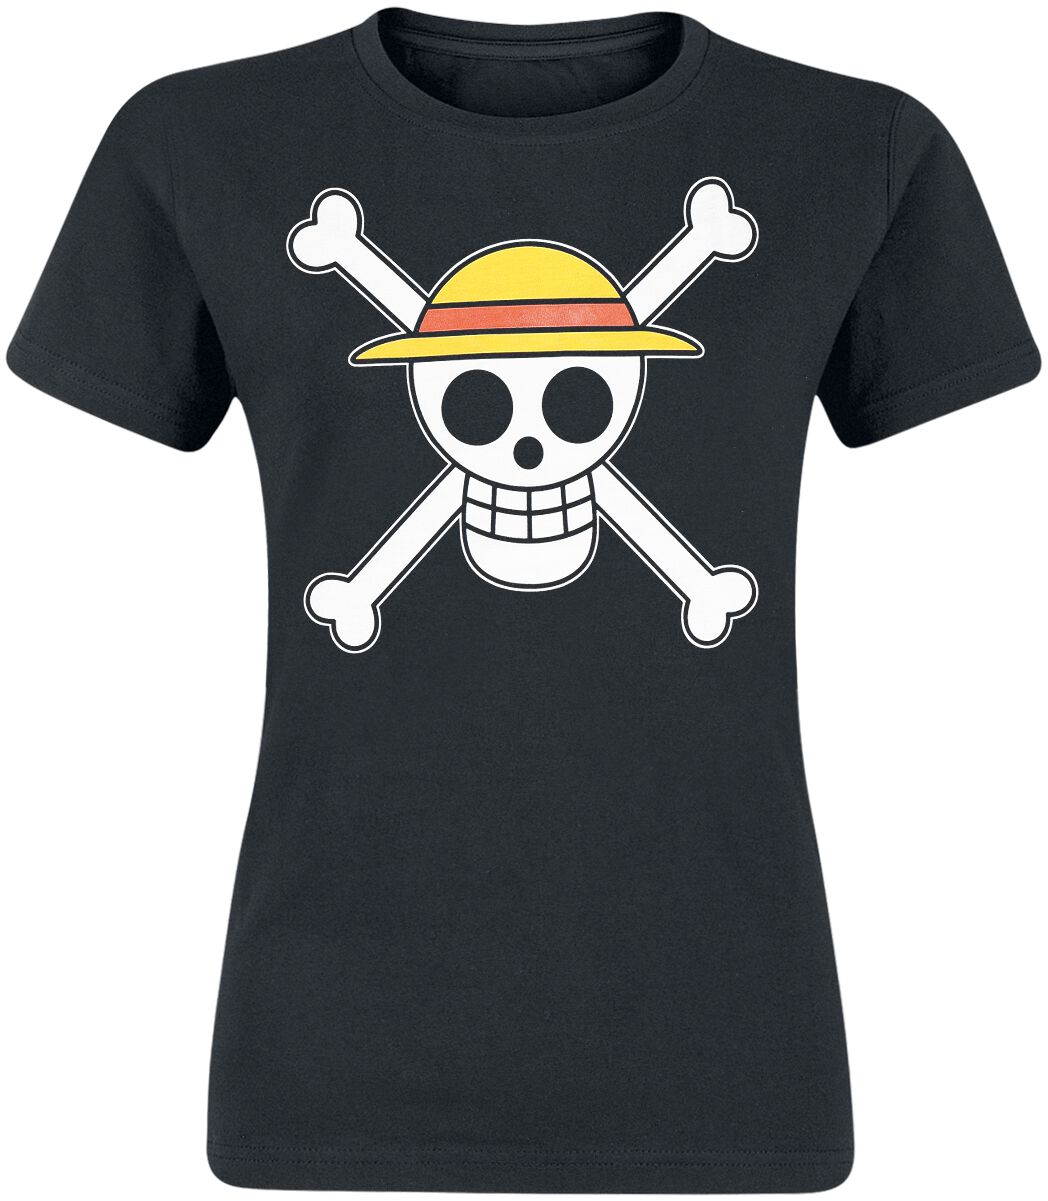 Image of T-Shirt Anime di One Piece - Skull - S a L - Donna - nero